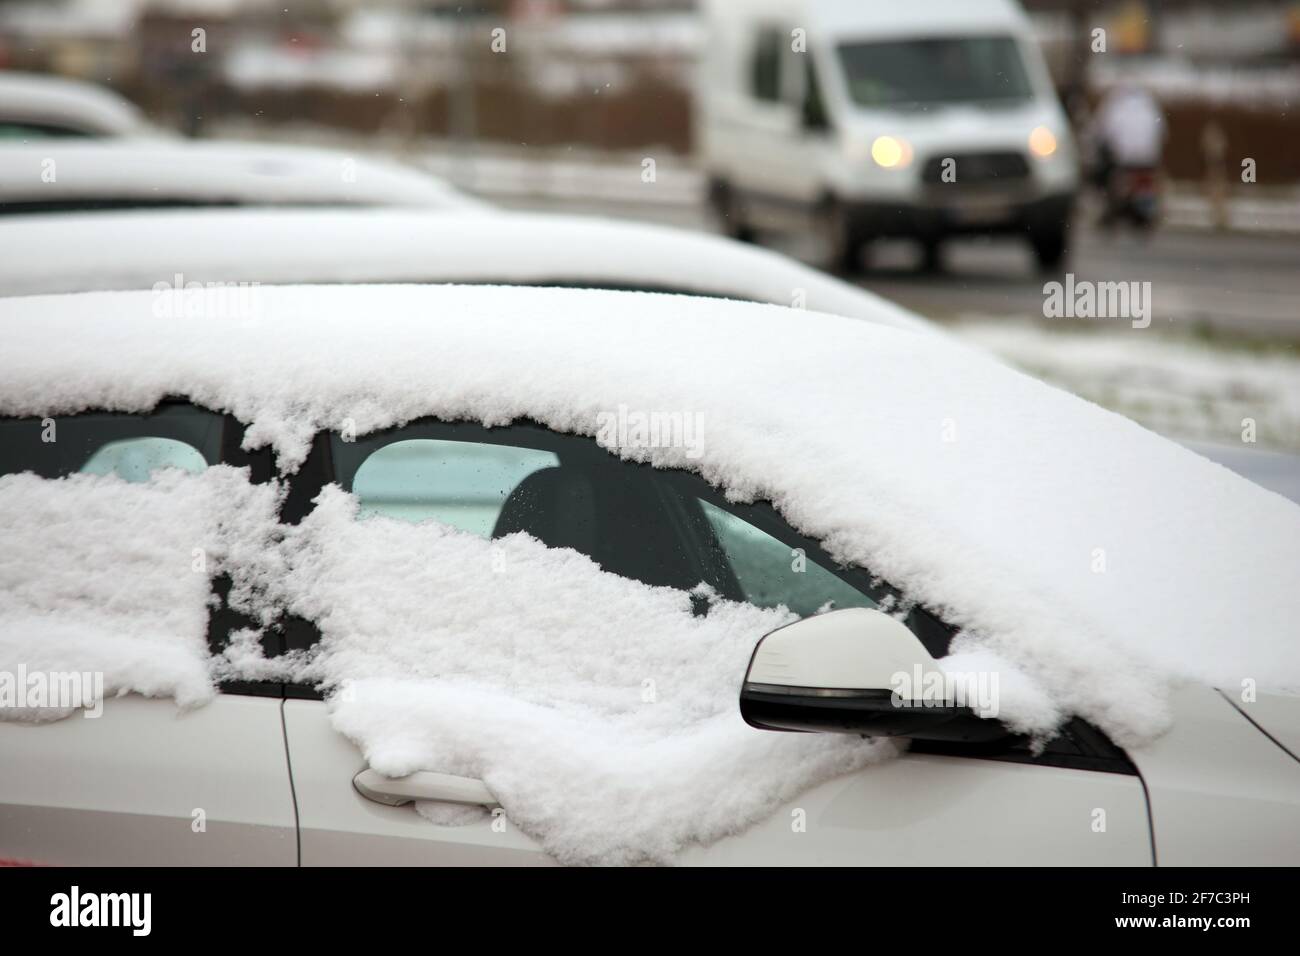 Nordhausen, Germany. 06th Apr, 2021. A vehicle is covered in snow on a